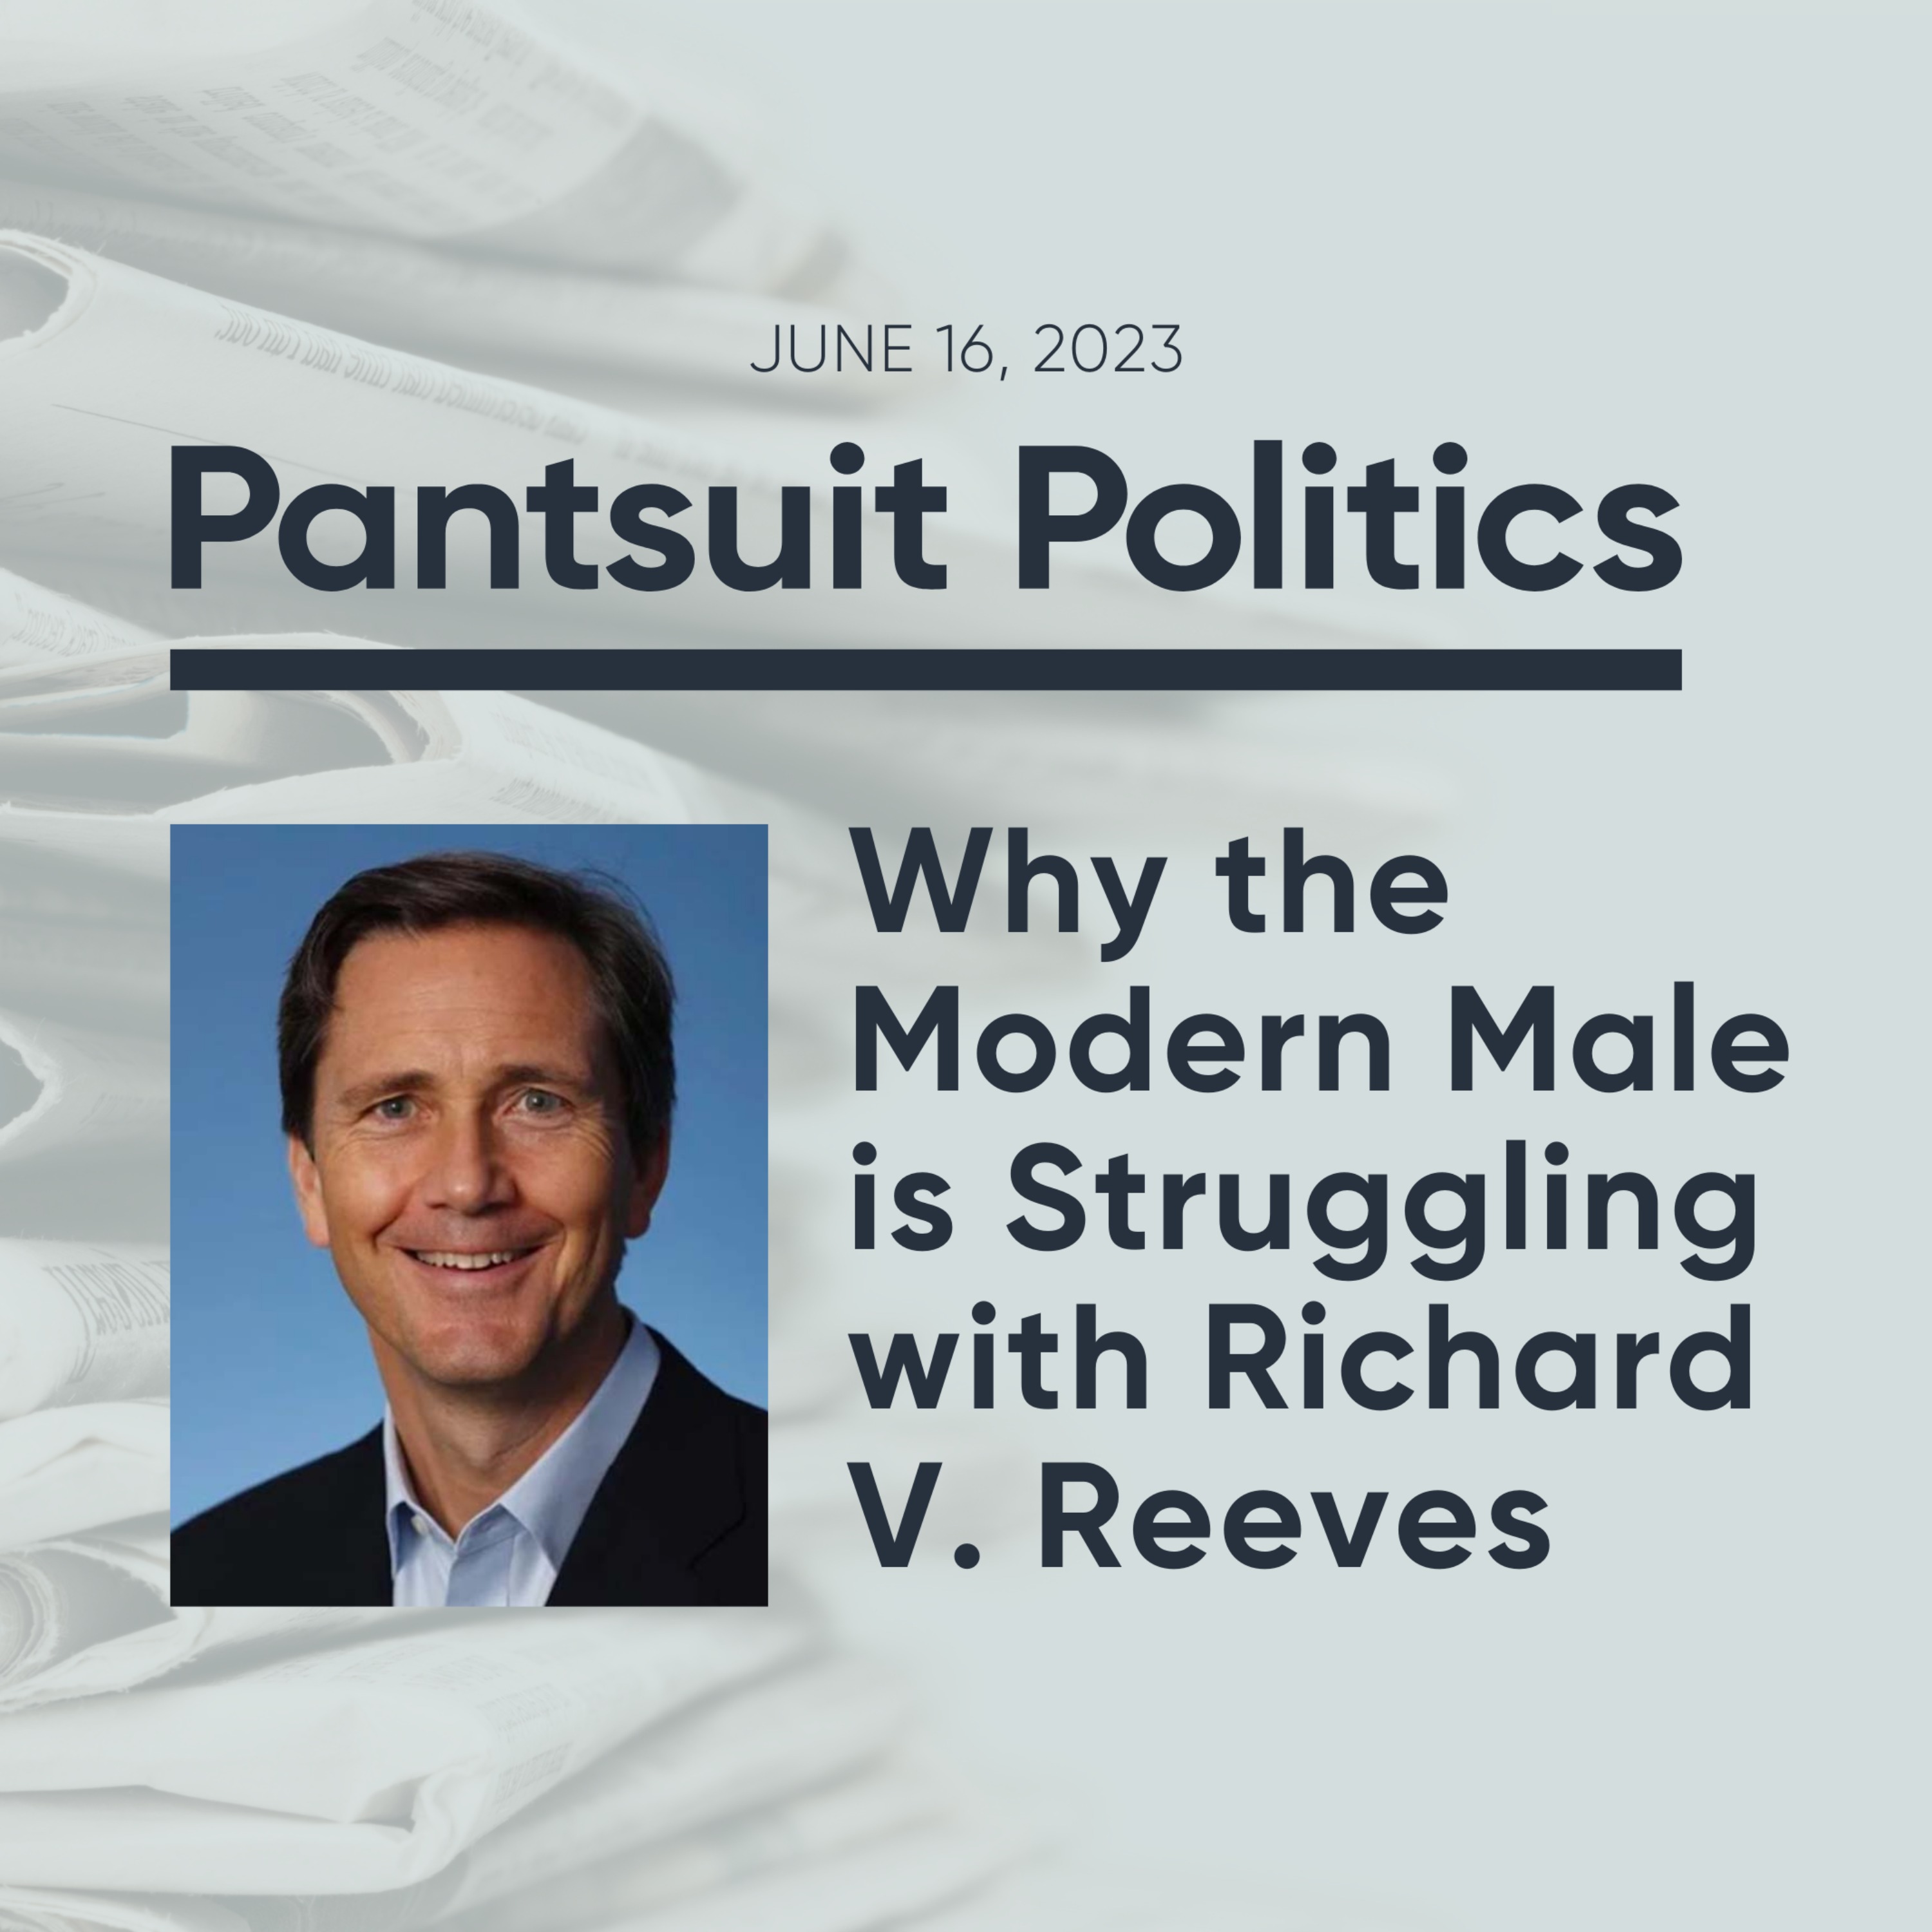 Why the Modern Male is Struggling with Richard V. Reeves